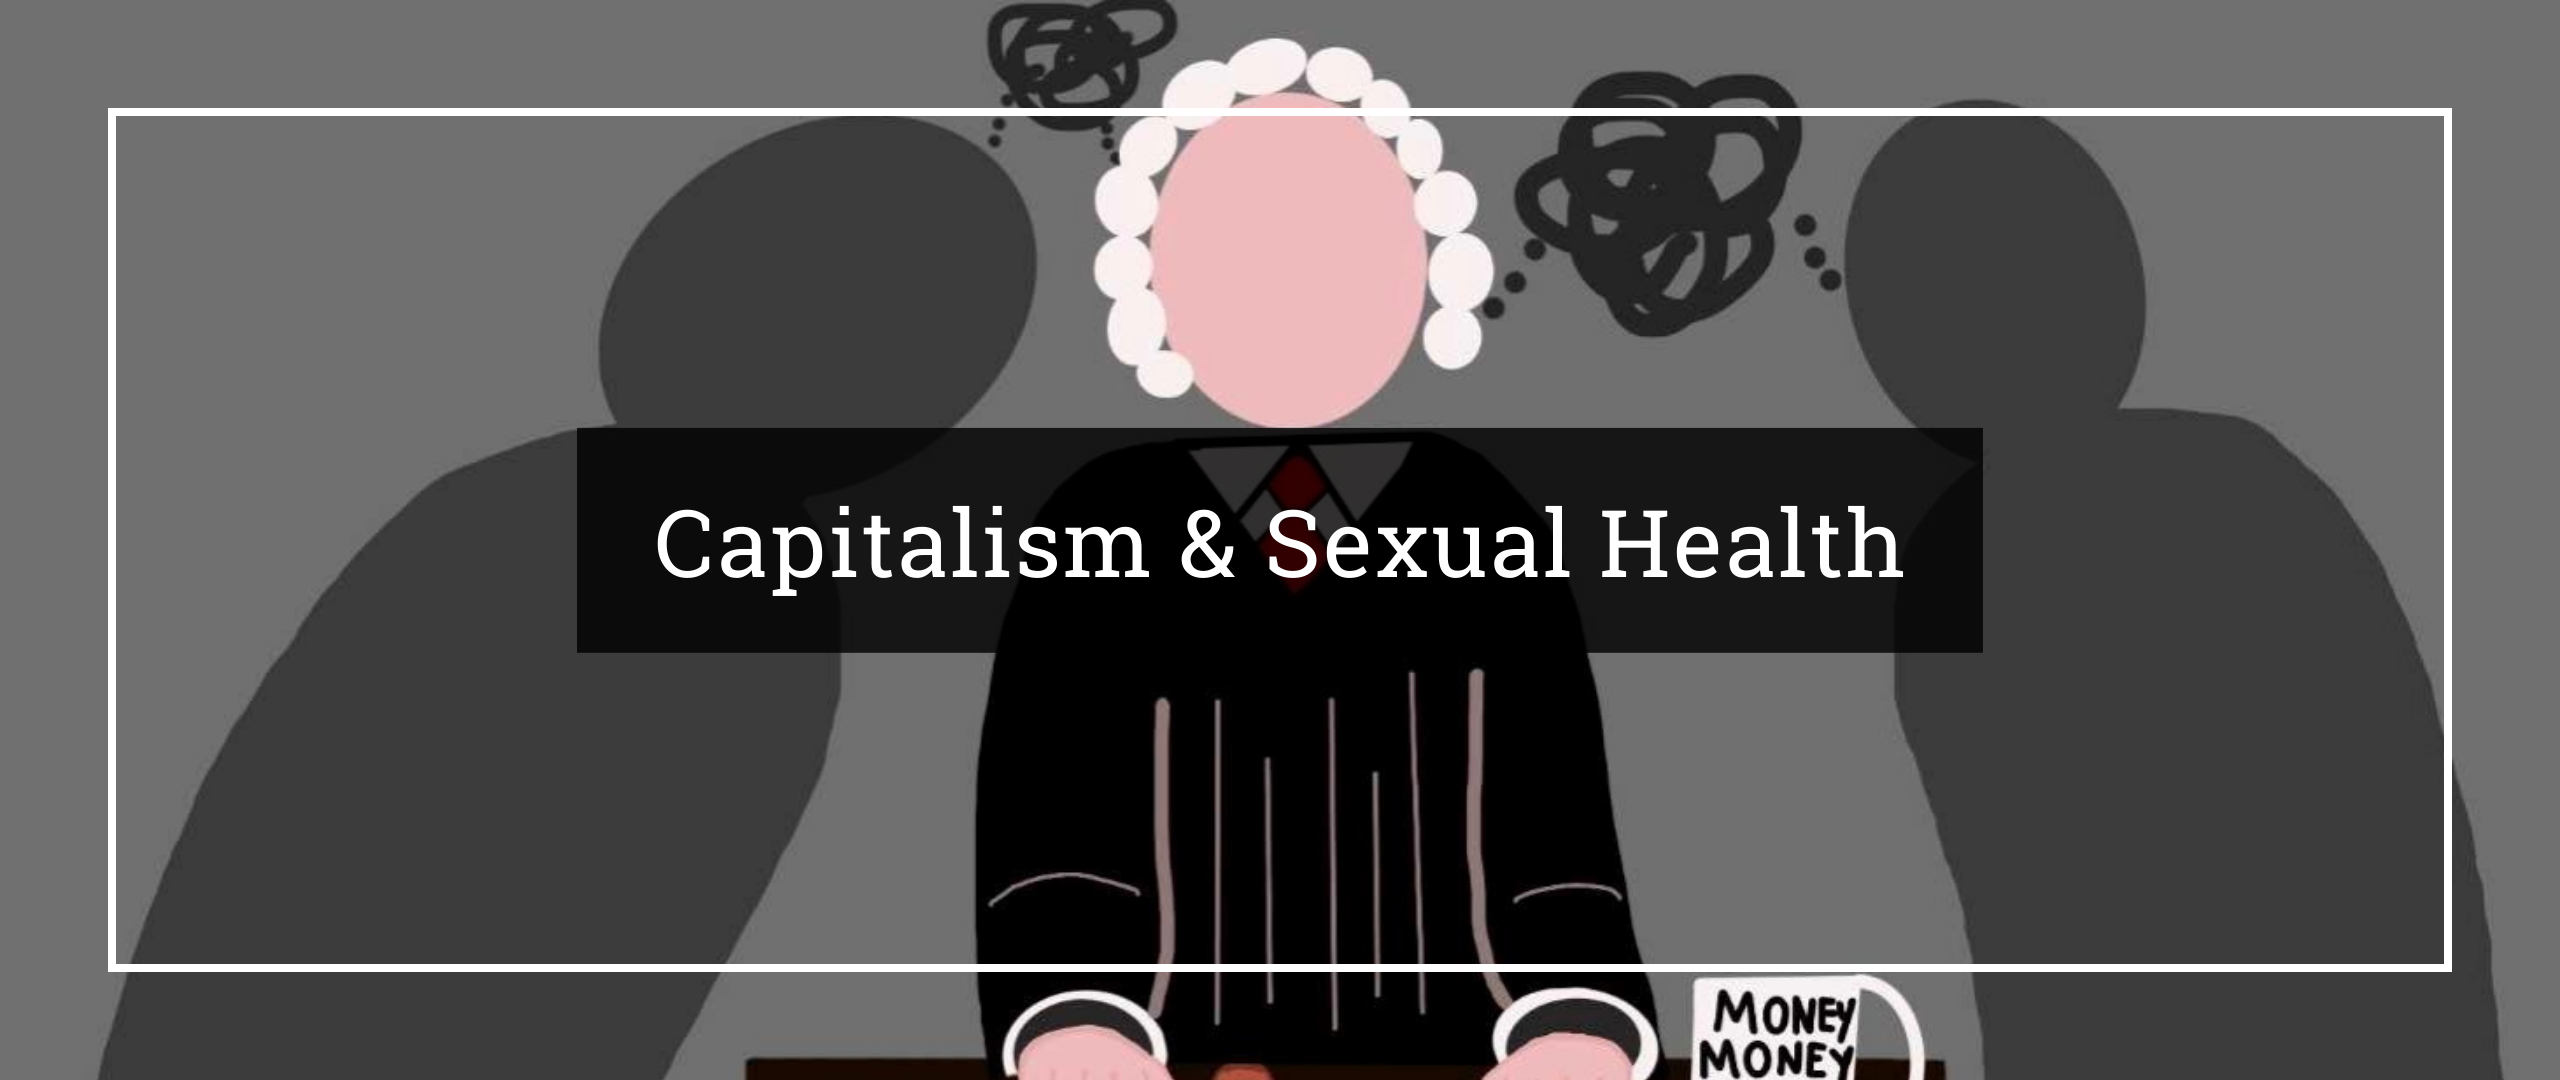 Capitalism and Sexual Health